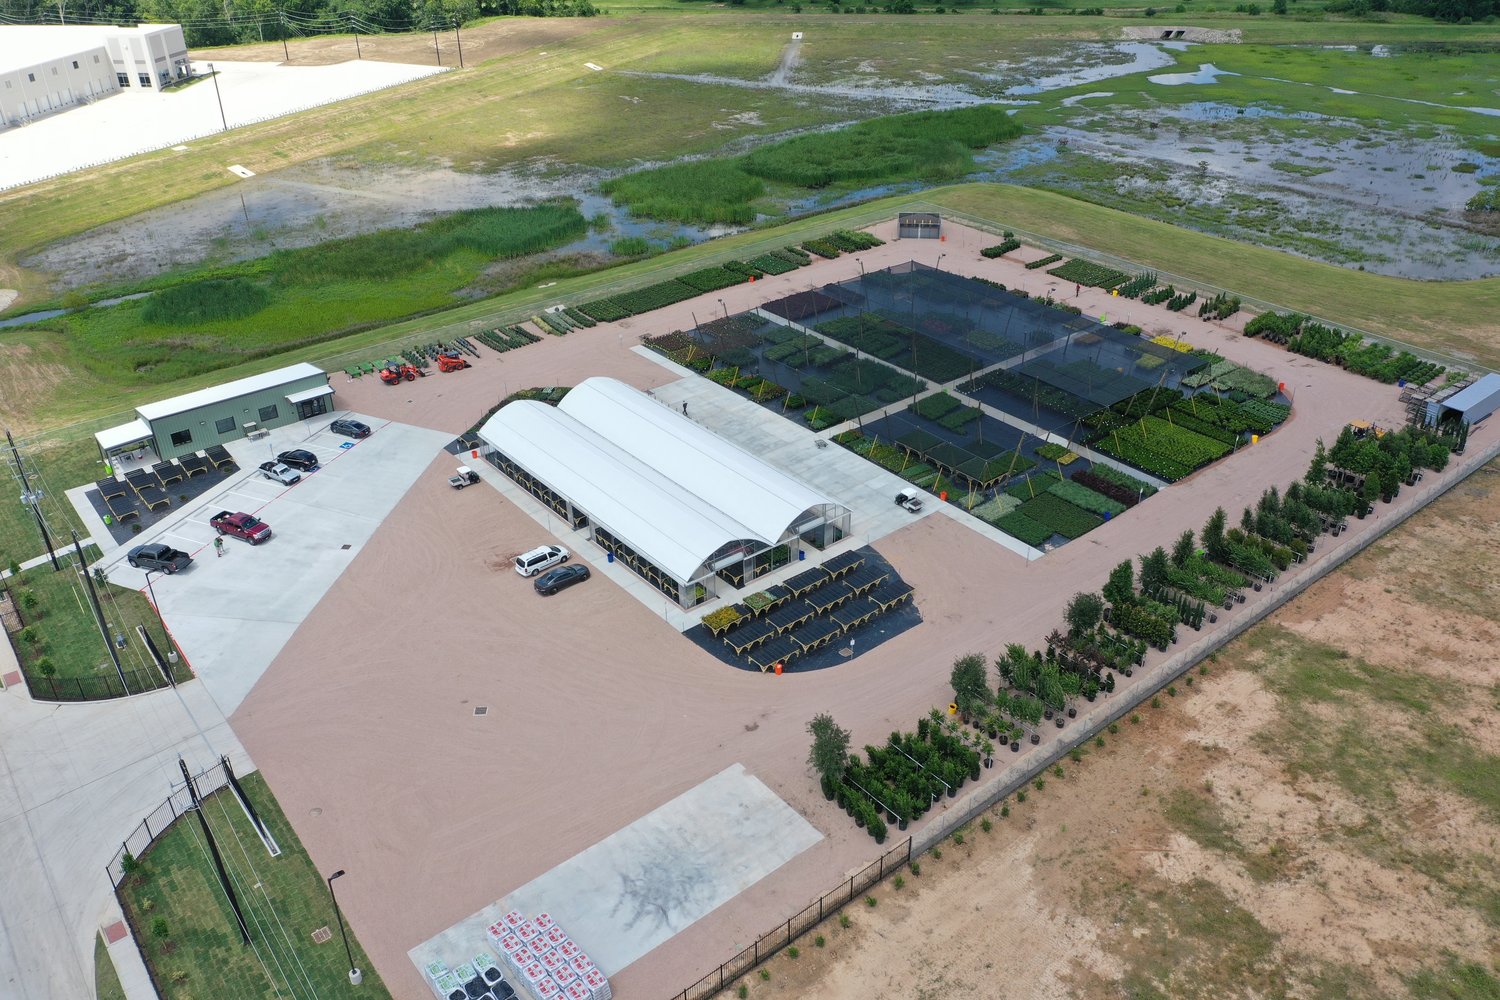 The new nursery is expected to bring a dozen or more jobs to the Katy area and provide services to the growing Katy area.